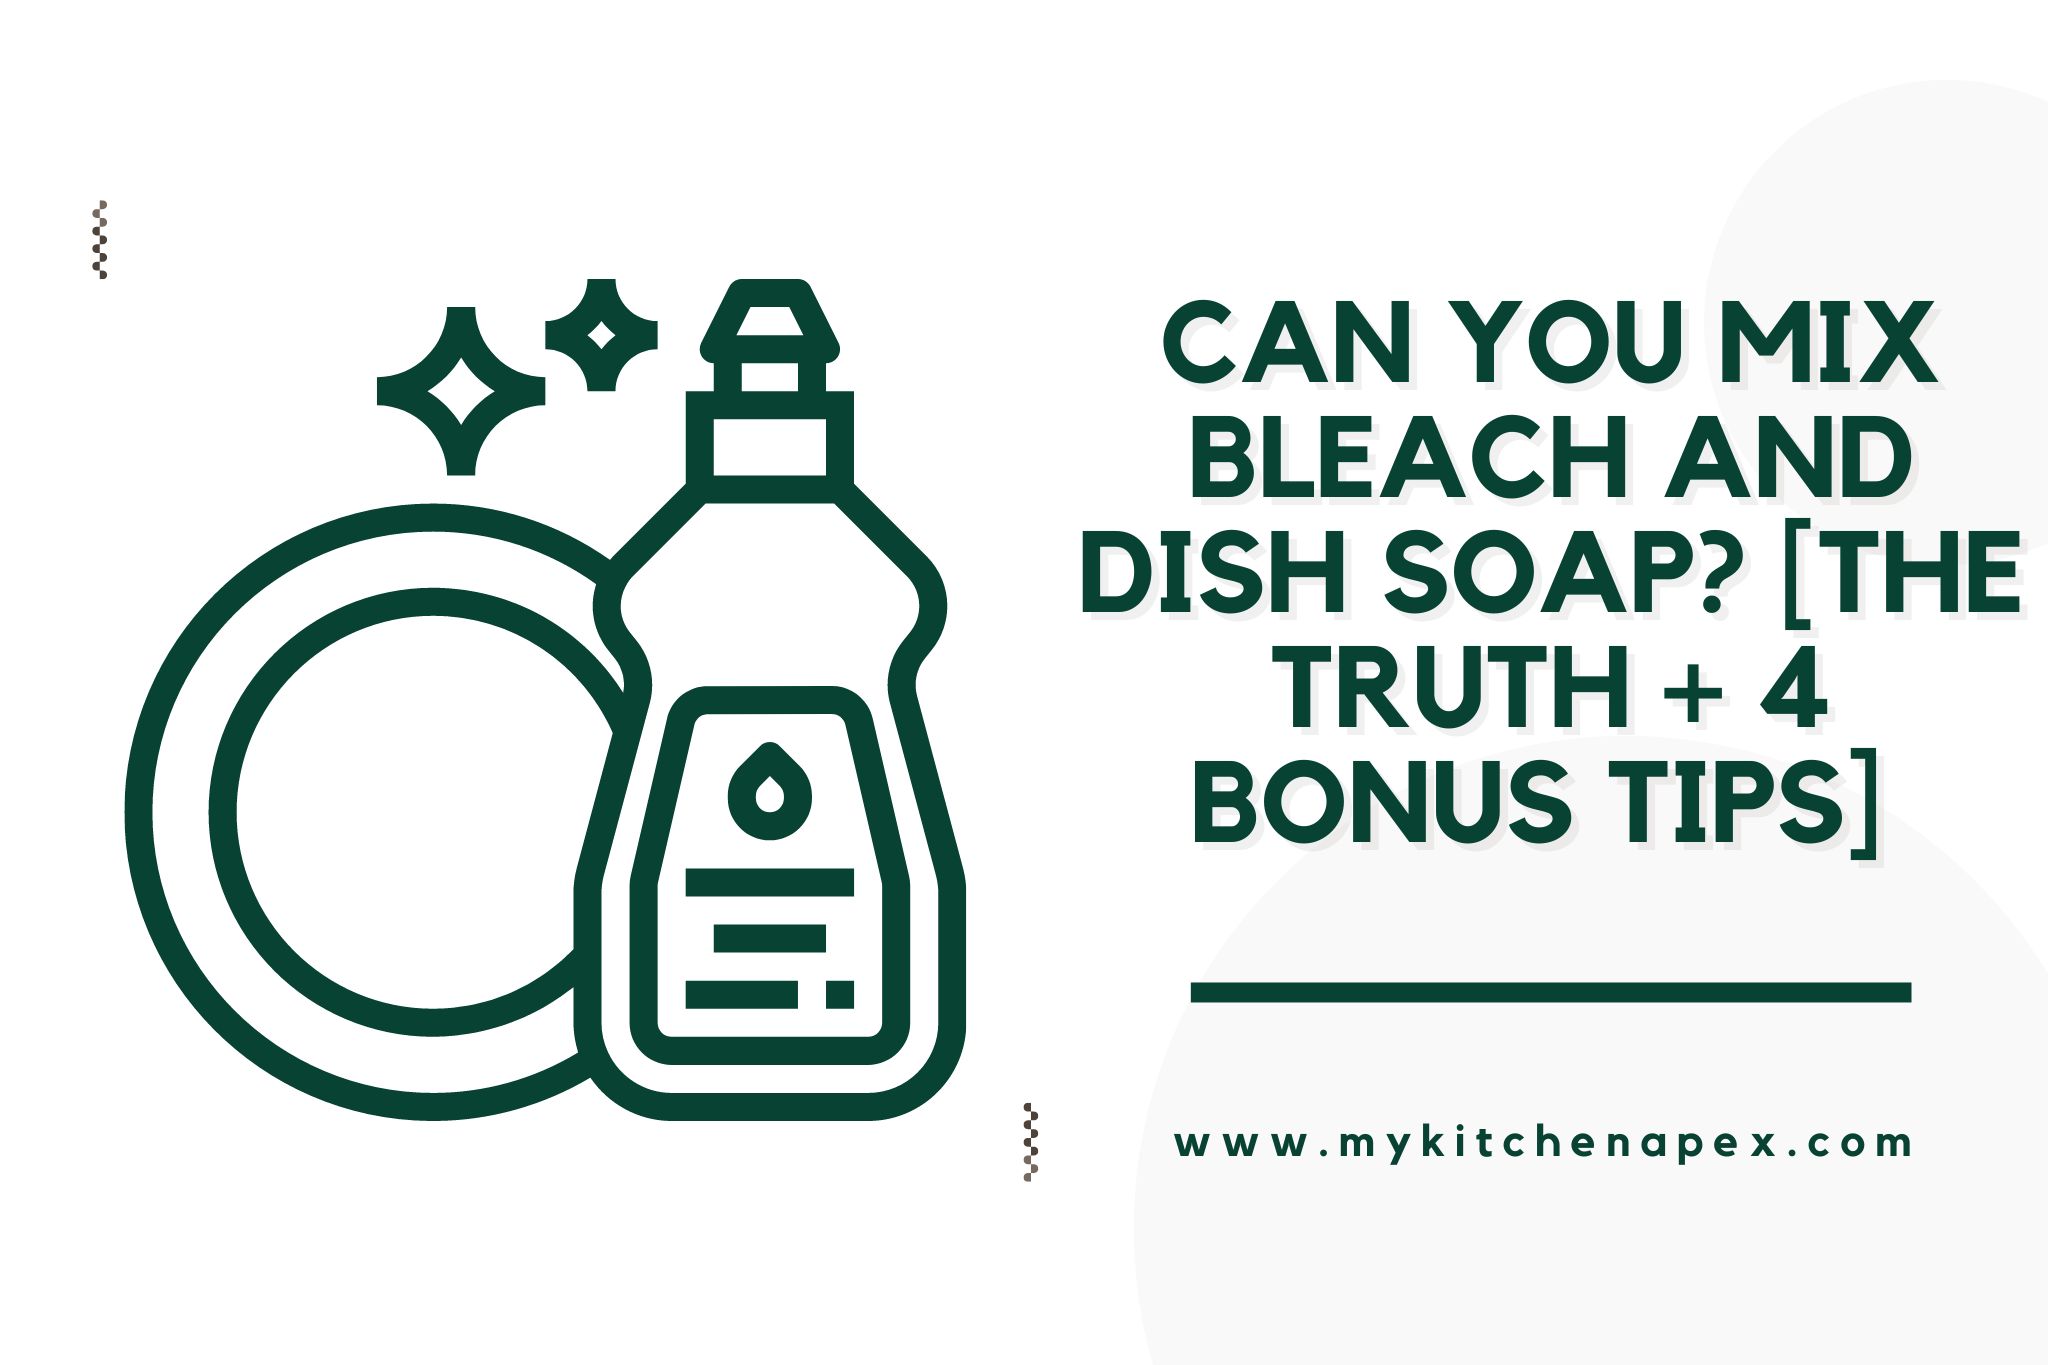 Can You Mix Bleach And Dish Soap? [The TRUTH + 4 BONUS Tips] 